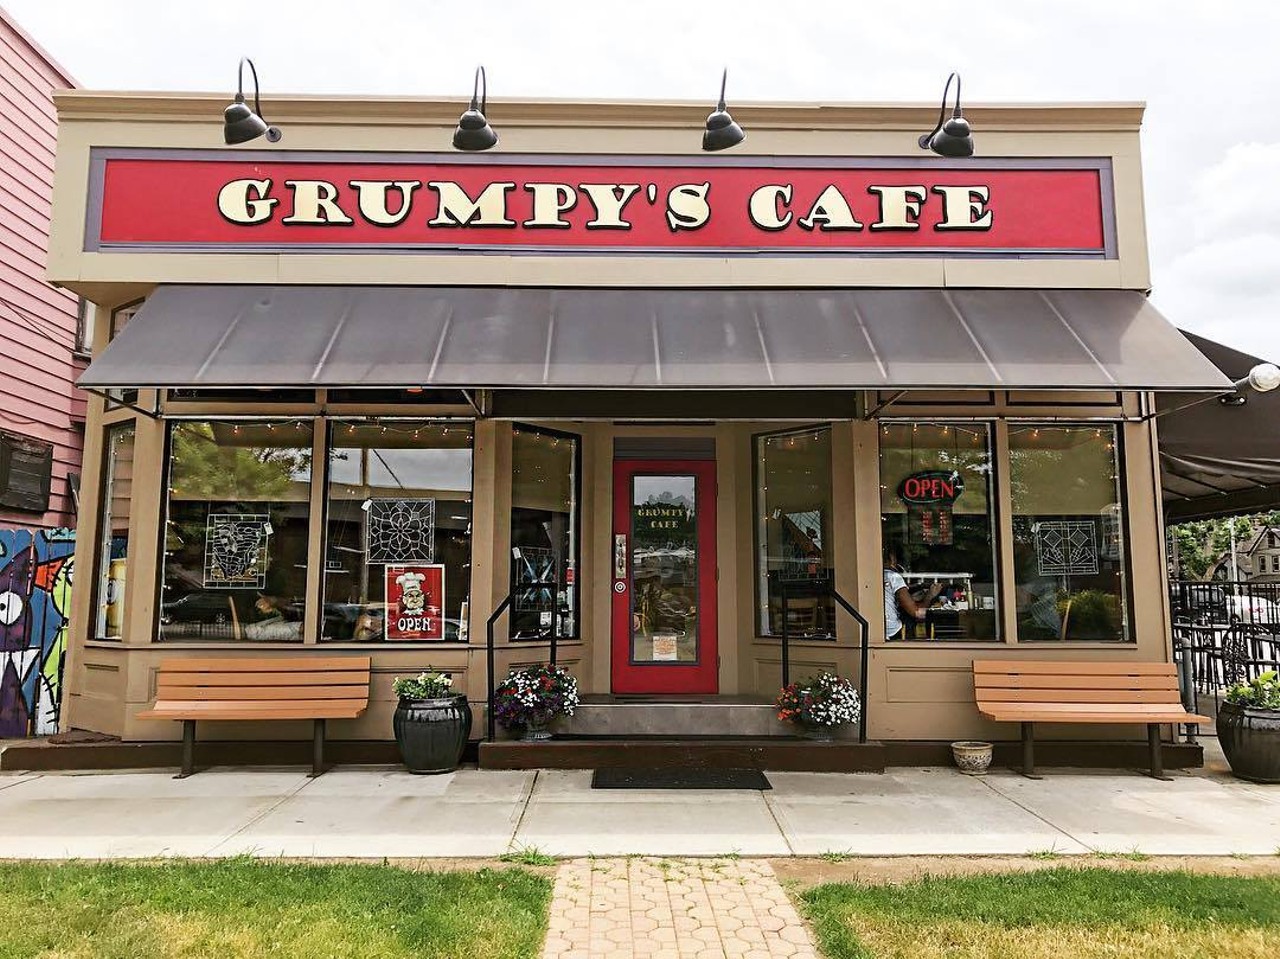  Grumpy&#146;s Cafe
2621 West 14th St., Cleveland
If breakfast is the most important meal of the day, Grumpy's is the most important restaurant in town. The Tremont staple, which is nicer than your typical hole-in-the-wall, is a cozier, artsier version of a greasy spoon &#151; warm colors and local art decorate the walls of the two-room affair. Grumpy's has several omelets and special dishes like the West 14th Special with corned beef hash, two eggs and toast. 
Photo via Scene Archives